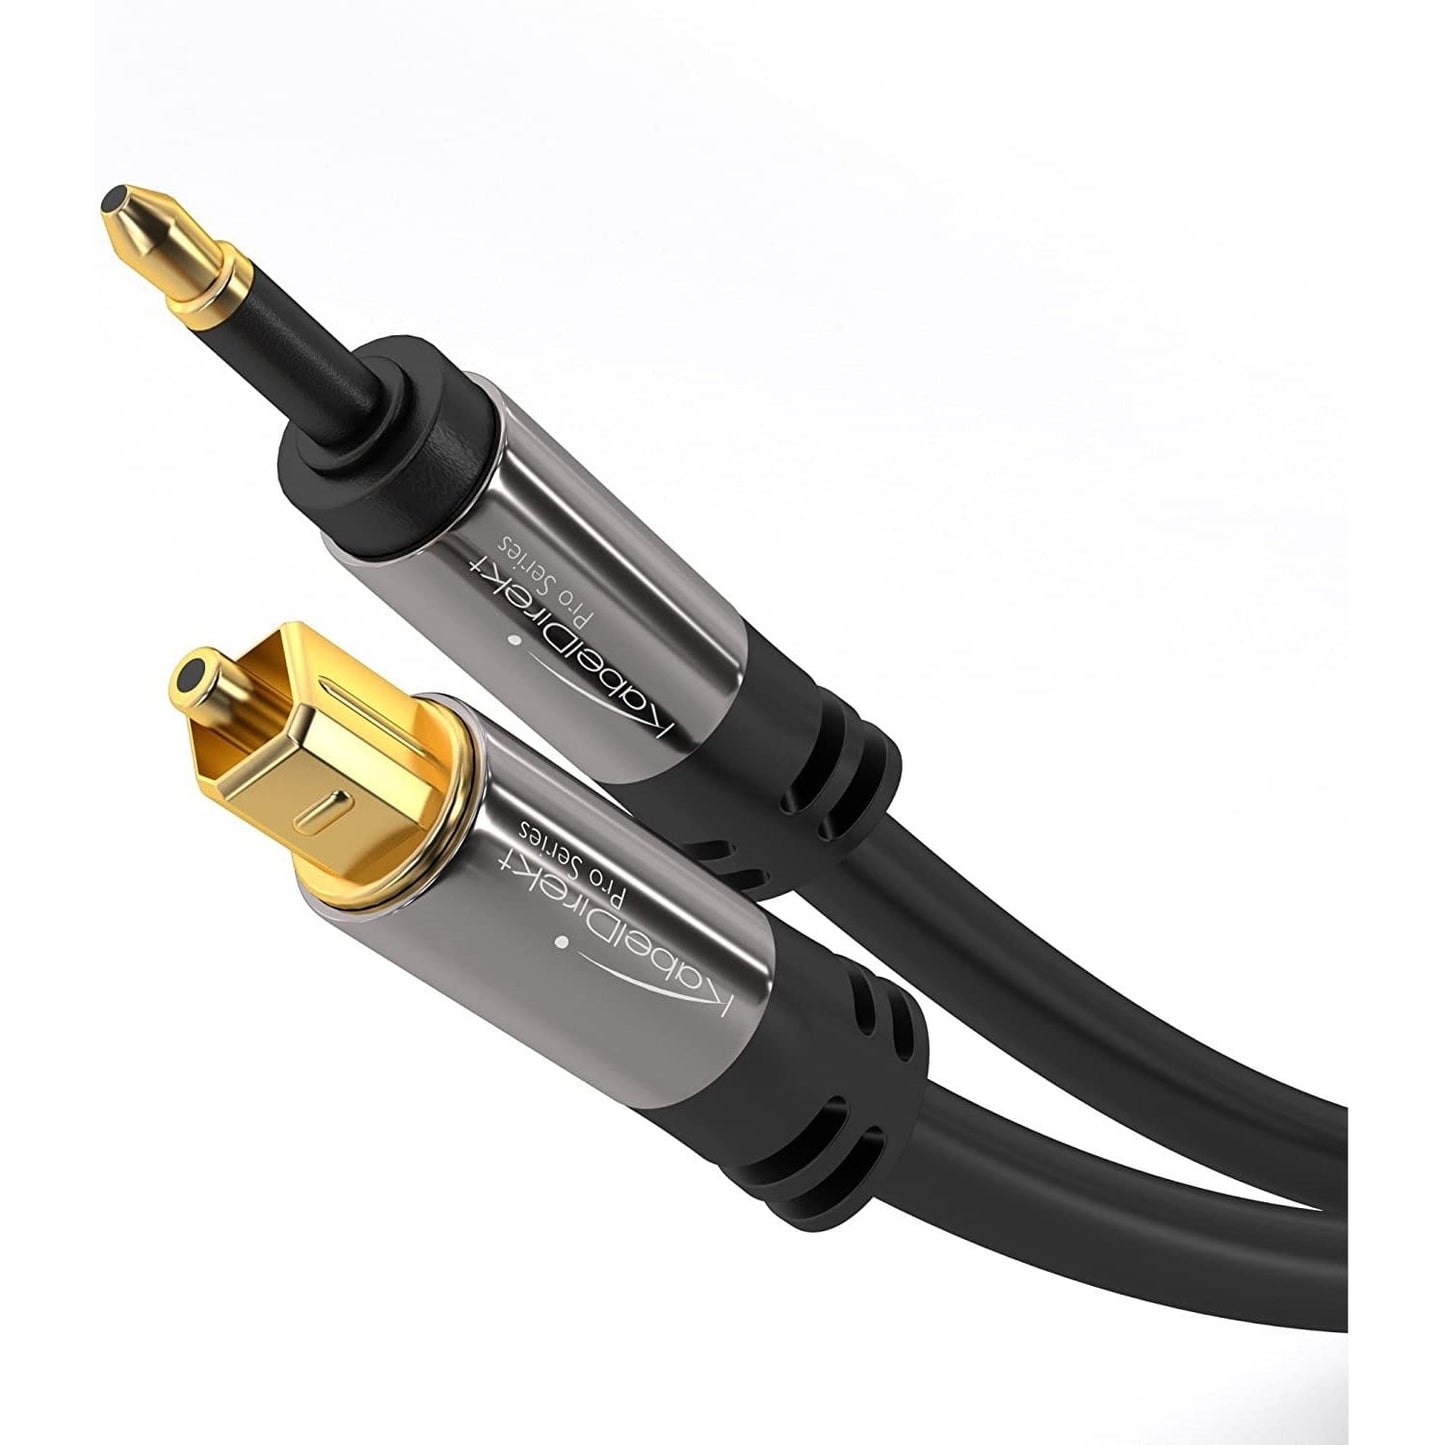 Mini-TOSLINK cable – digital audio cable, optical, TOSLINK to Mini-TOSLINK, fiber optic, black